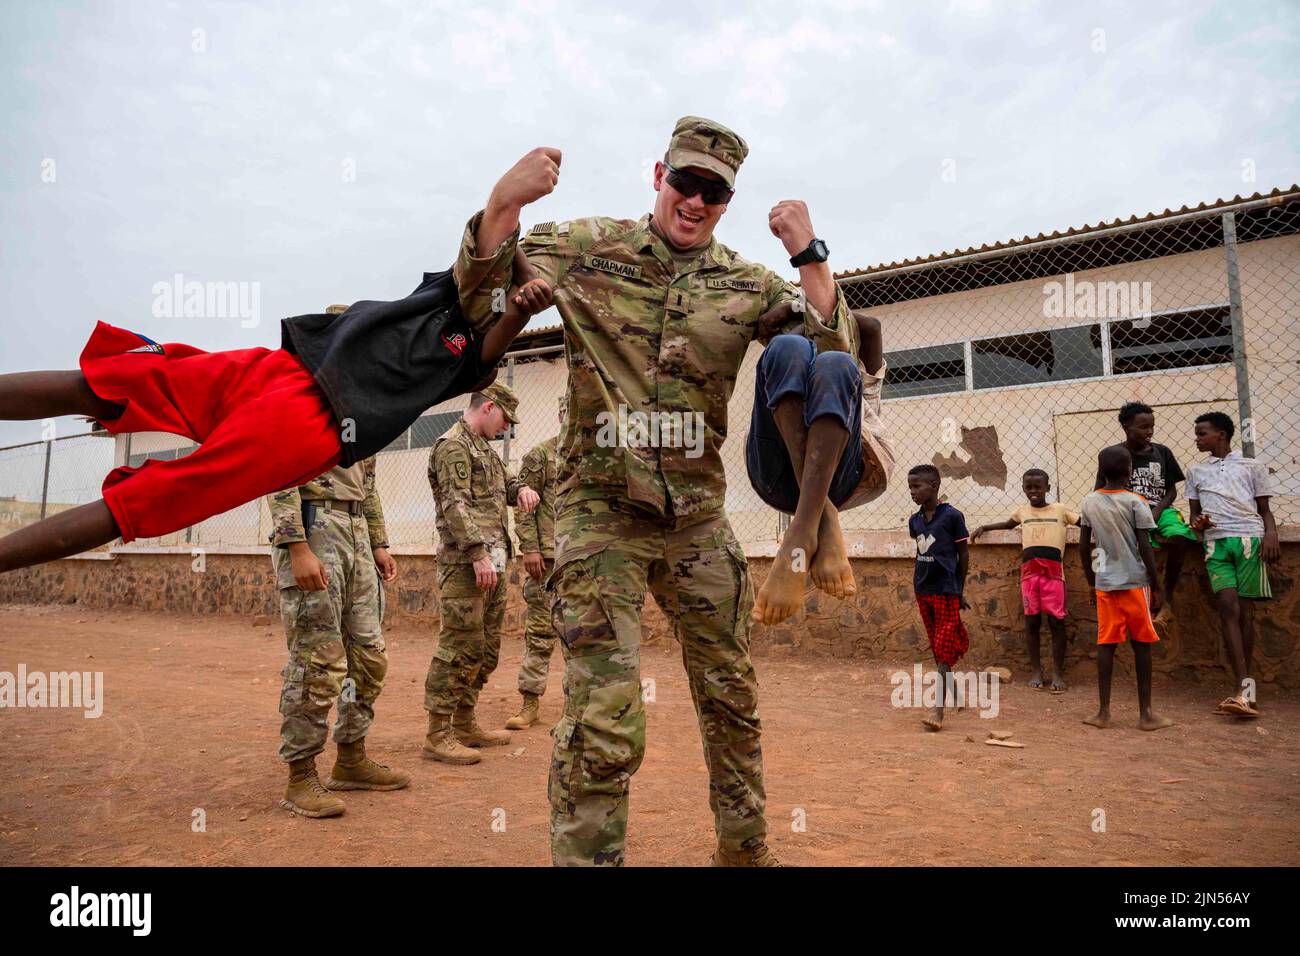 Chabelley Village, Djibouti. 15th July, 2022. U.S. Army 1st Lt. Austin Chapman, 268th Military Police Company command executive, lifts two children up during a visit at Chabelley village, Djibouti, July 15, 2022. U.S. Combined Joint Task Force-Horn of Africa and 449th Air Expeditionary Group personnel, located at Camp Lemonnier, Djibouti, regularly work with government leaders and citizens on a variety of projects to promote stability in East Africa. Credit: U.S. Air Force/ZUMA Press Wire Service/ZUMAPRESS.com/Alamy Live News Stock Photo